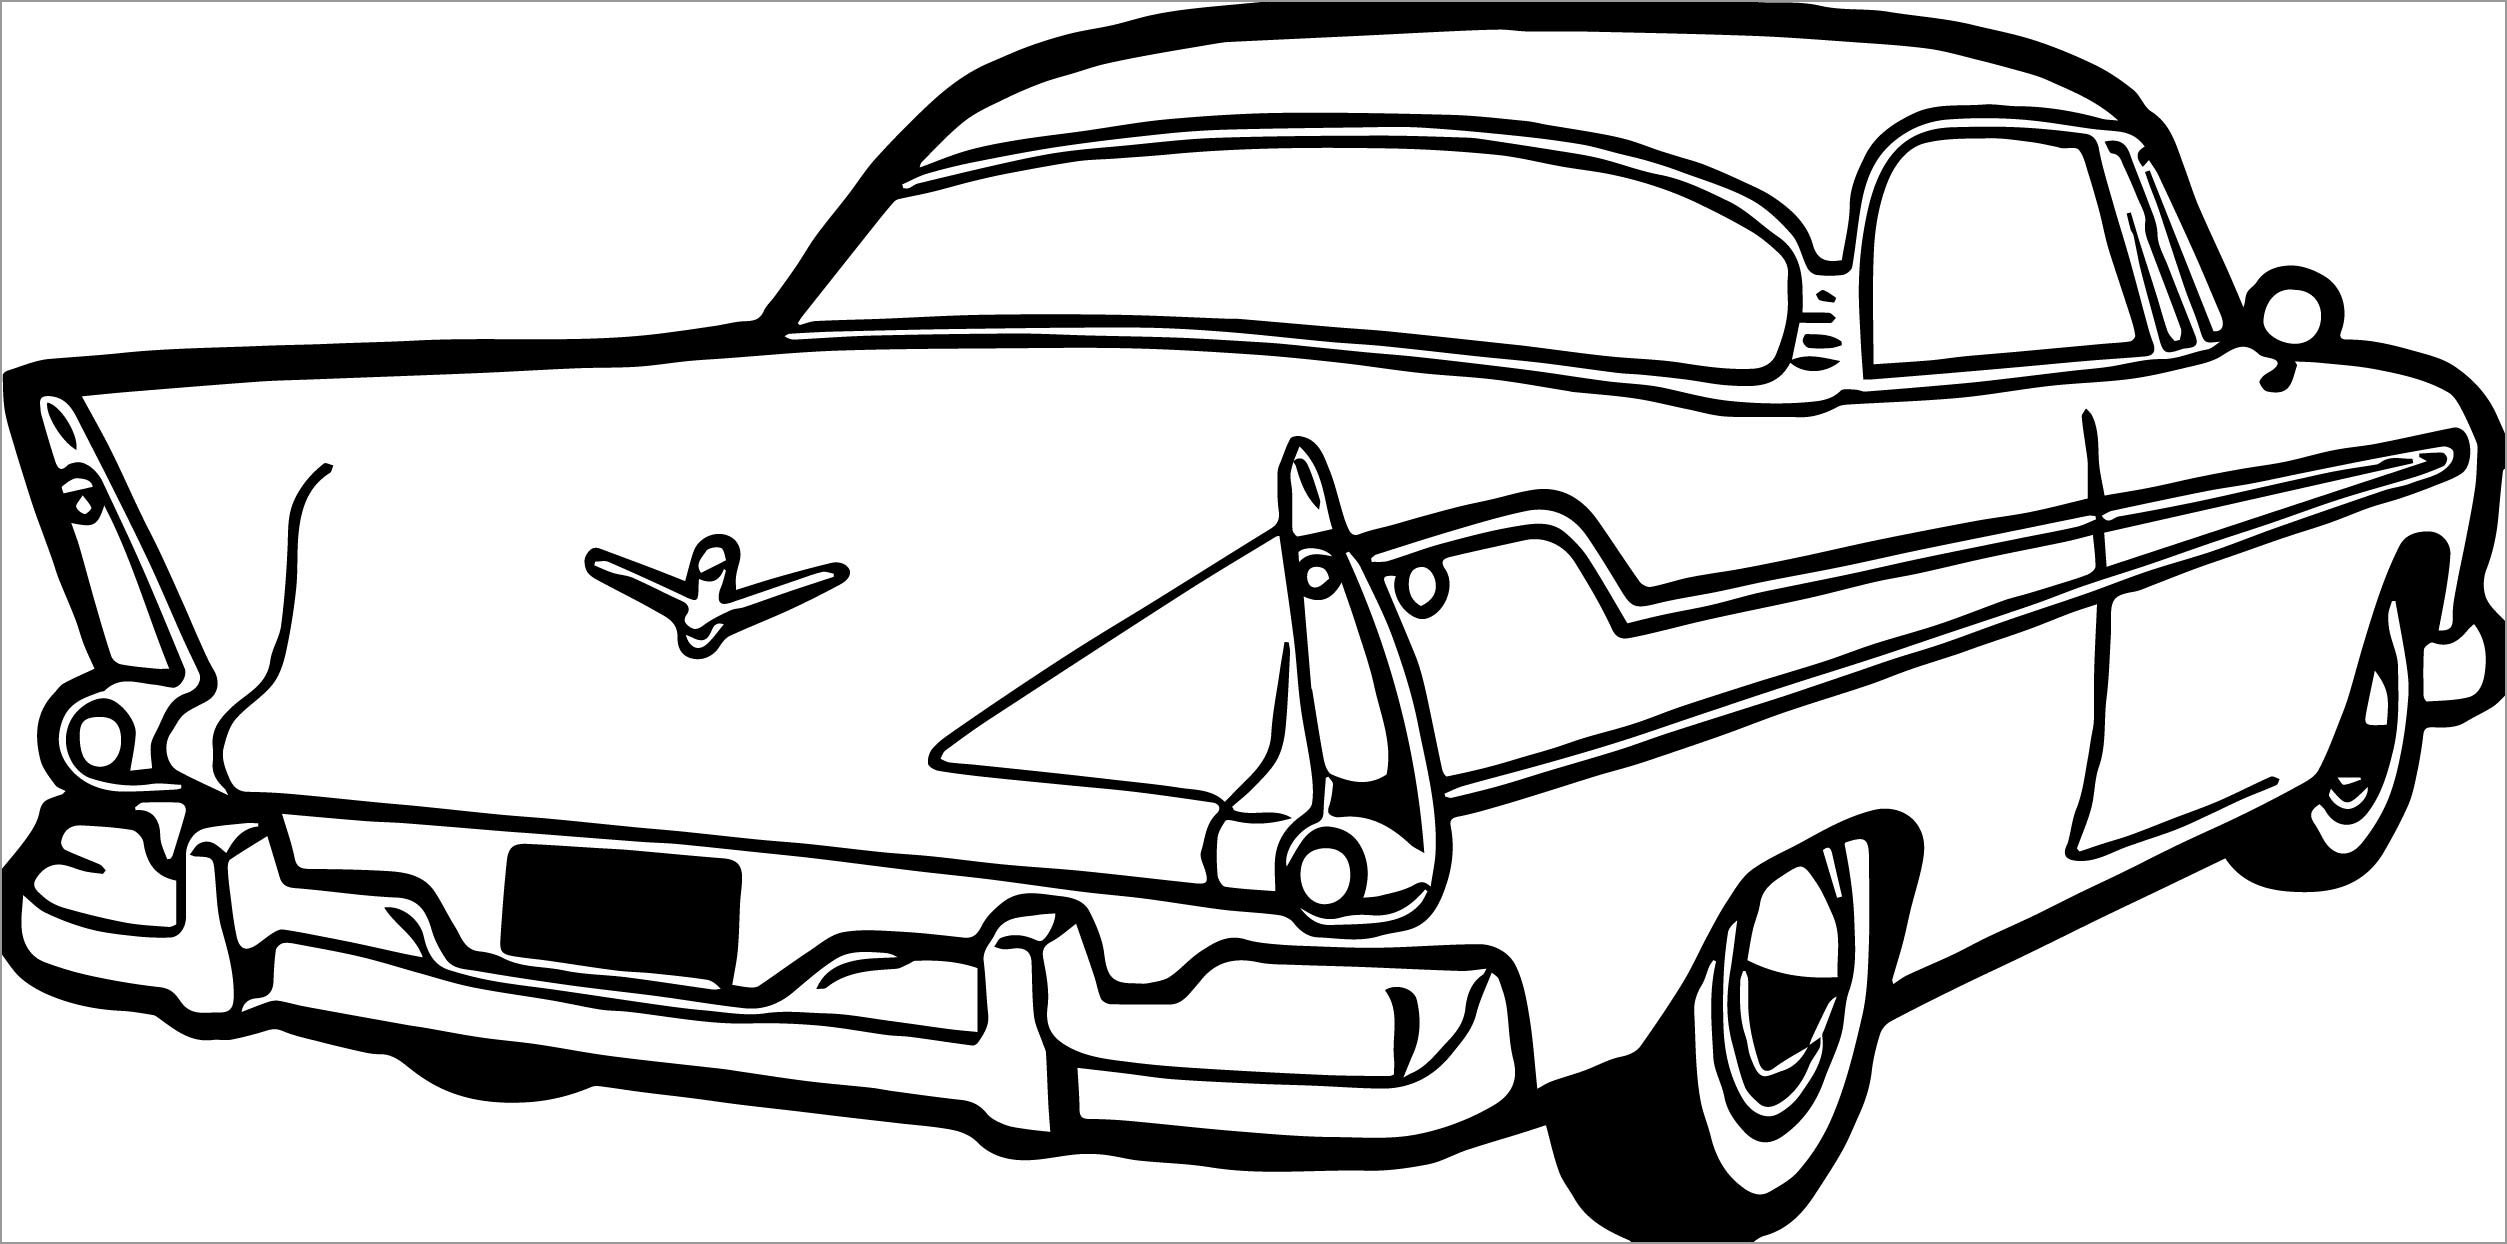 Download Antique Cars Coloring Pages - ColoringBay